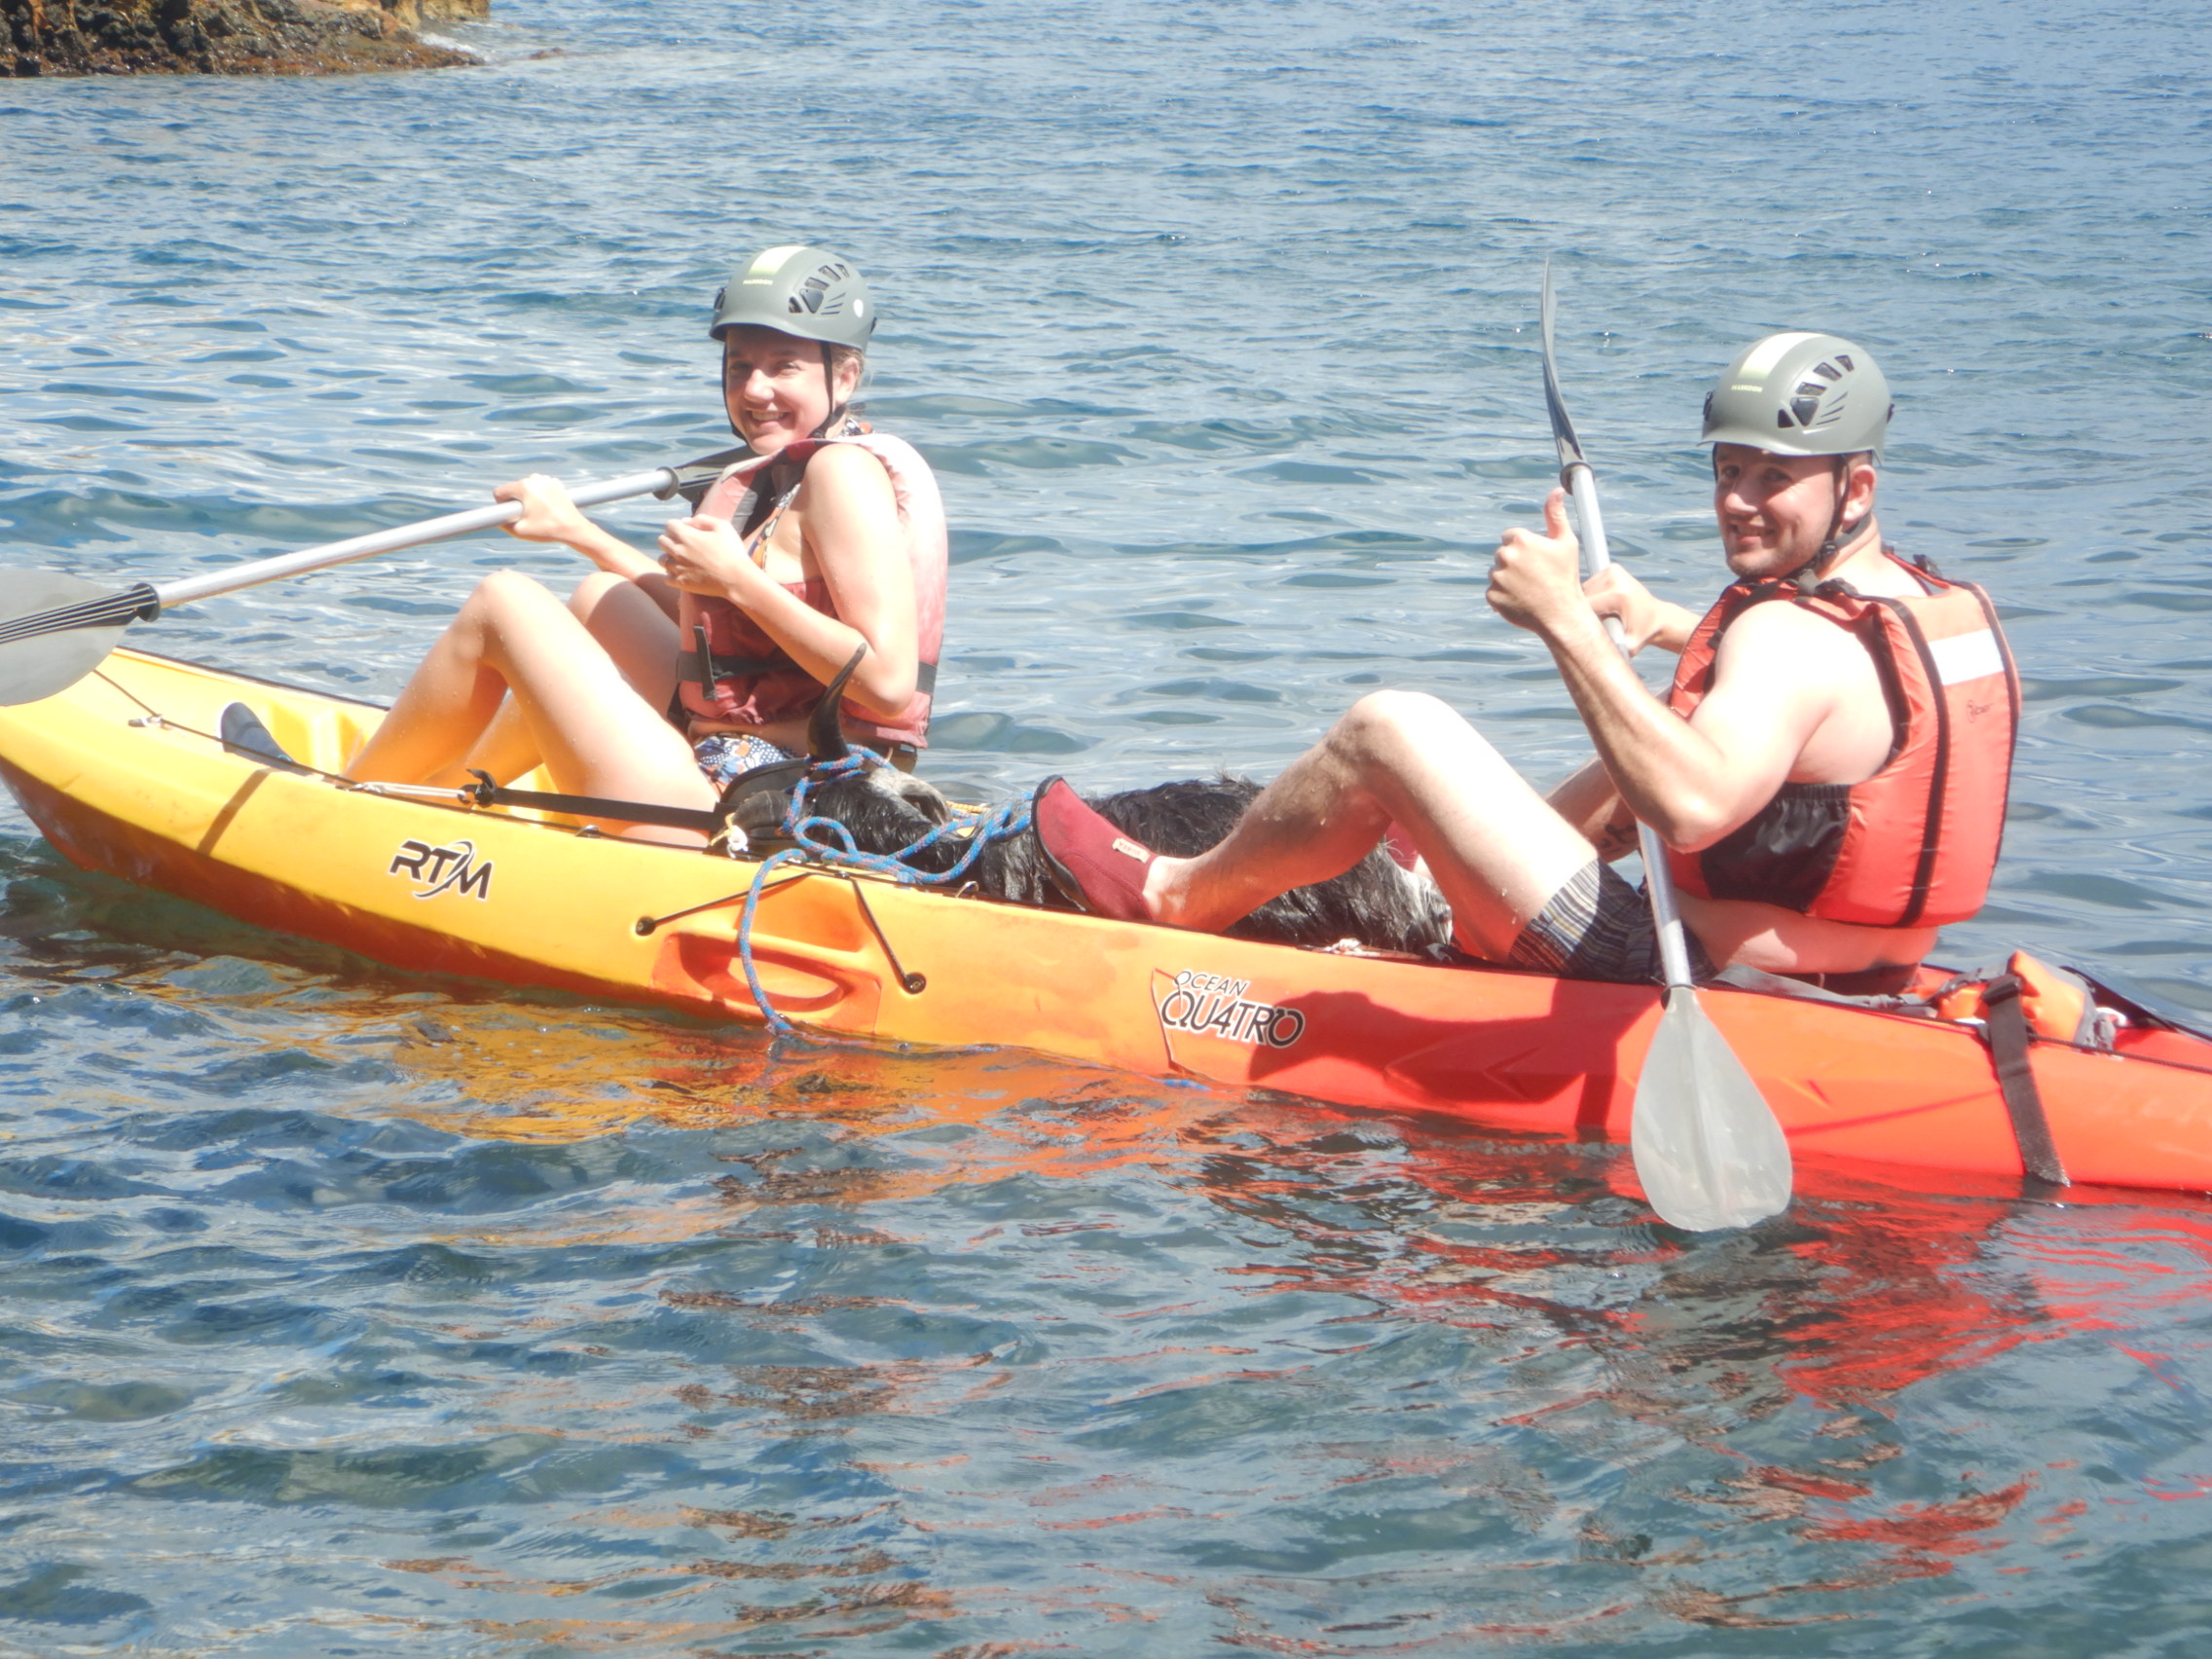 Daily guided escursion by Sit on Top Kayak + Coasteering adventures